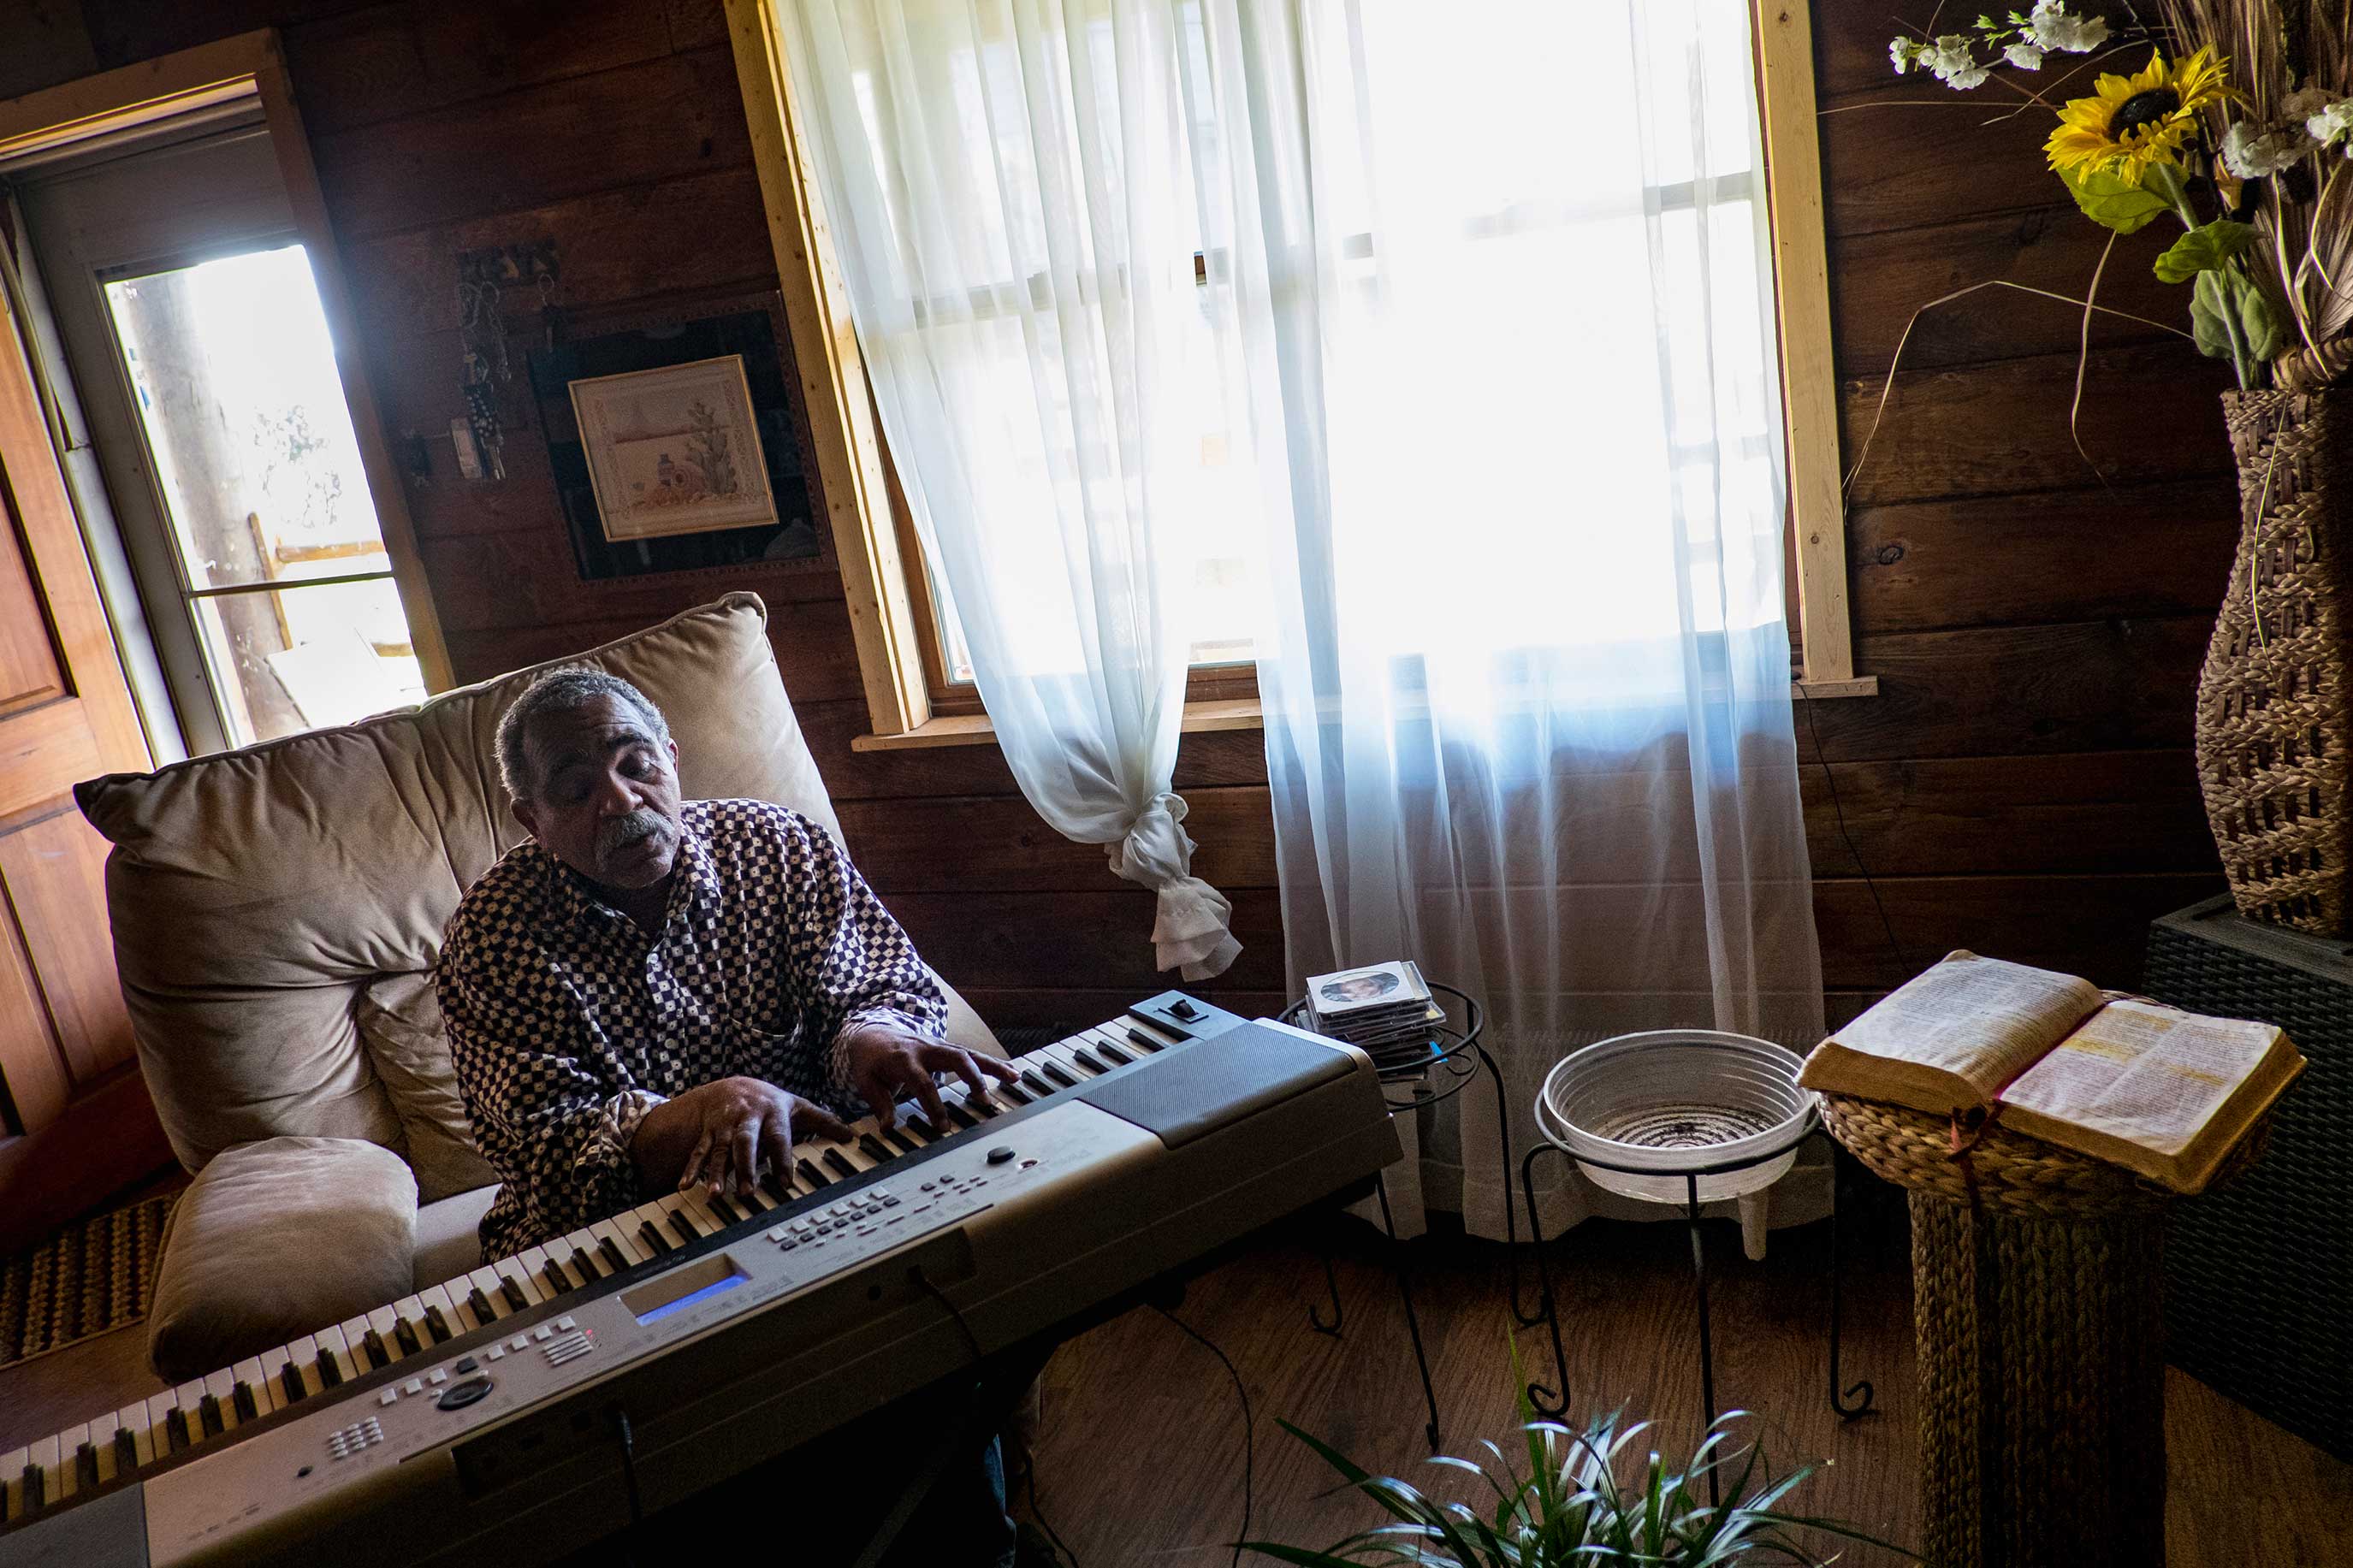 Donald "Amzi" Lightner, 63, plays music in his home in Clairton, Pennsylvania.